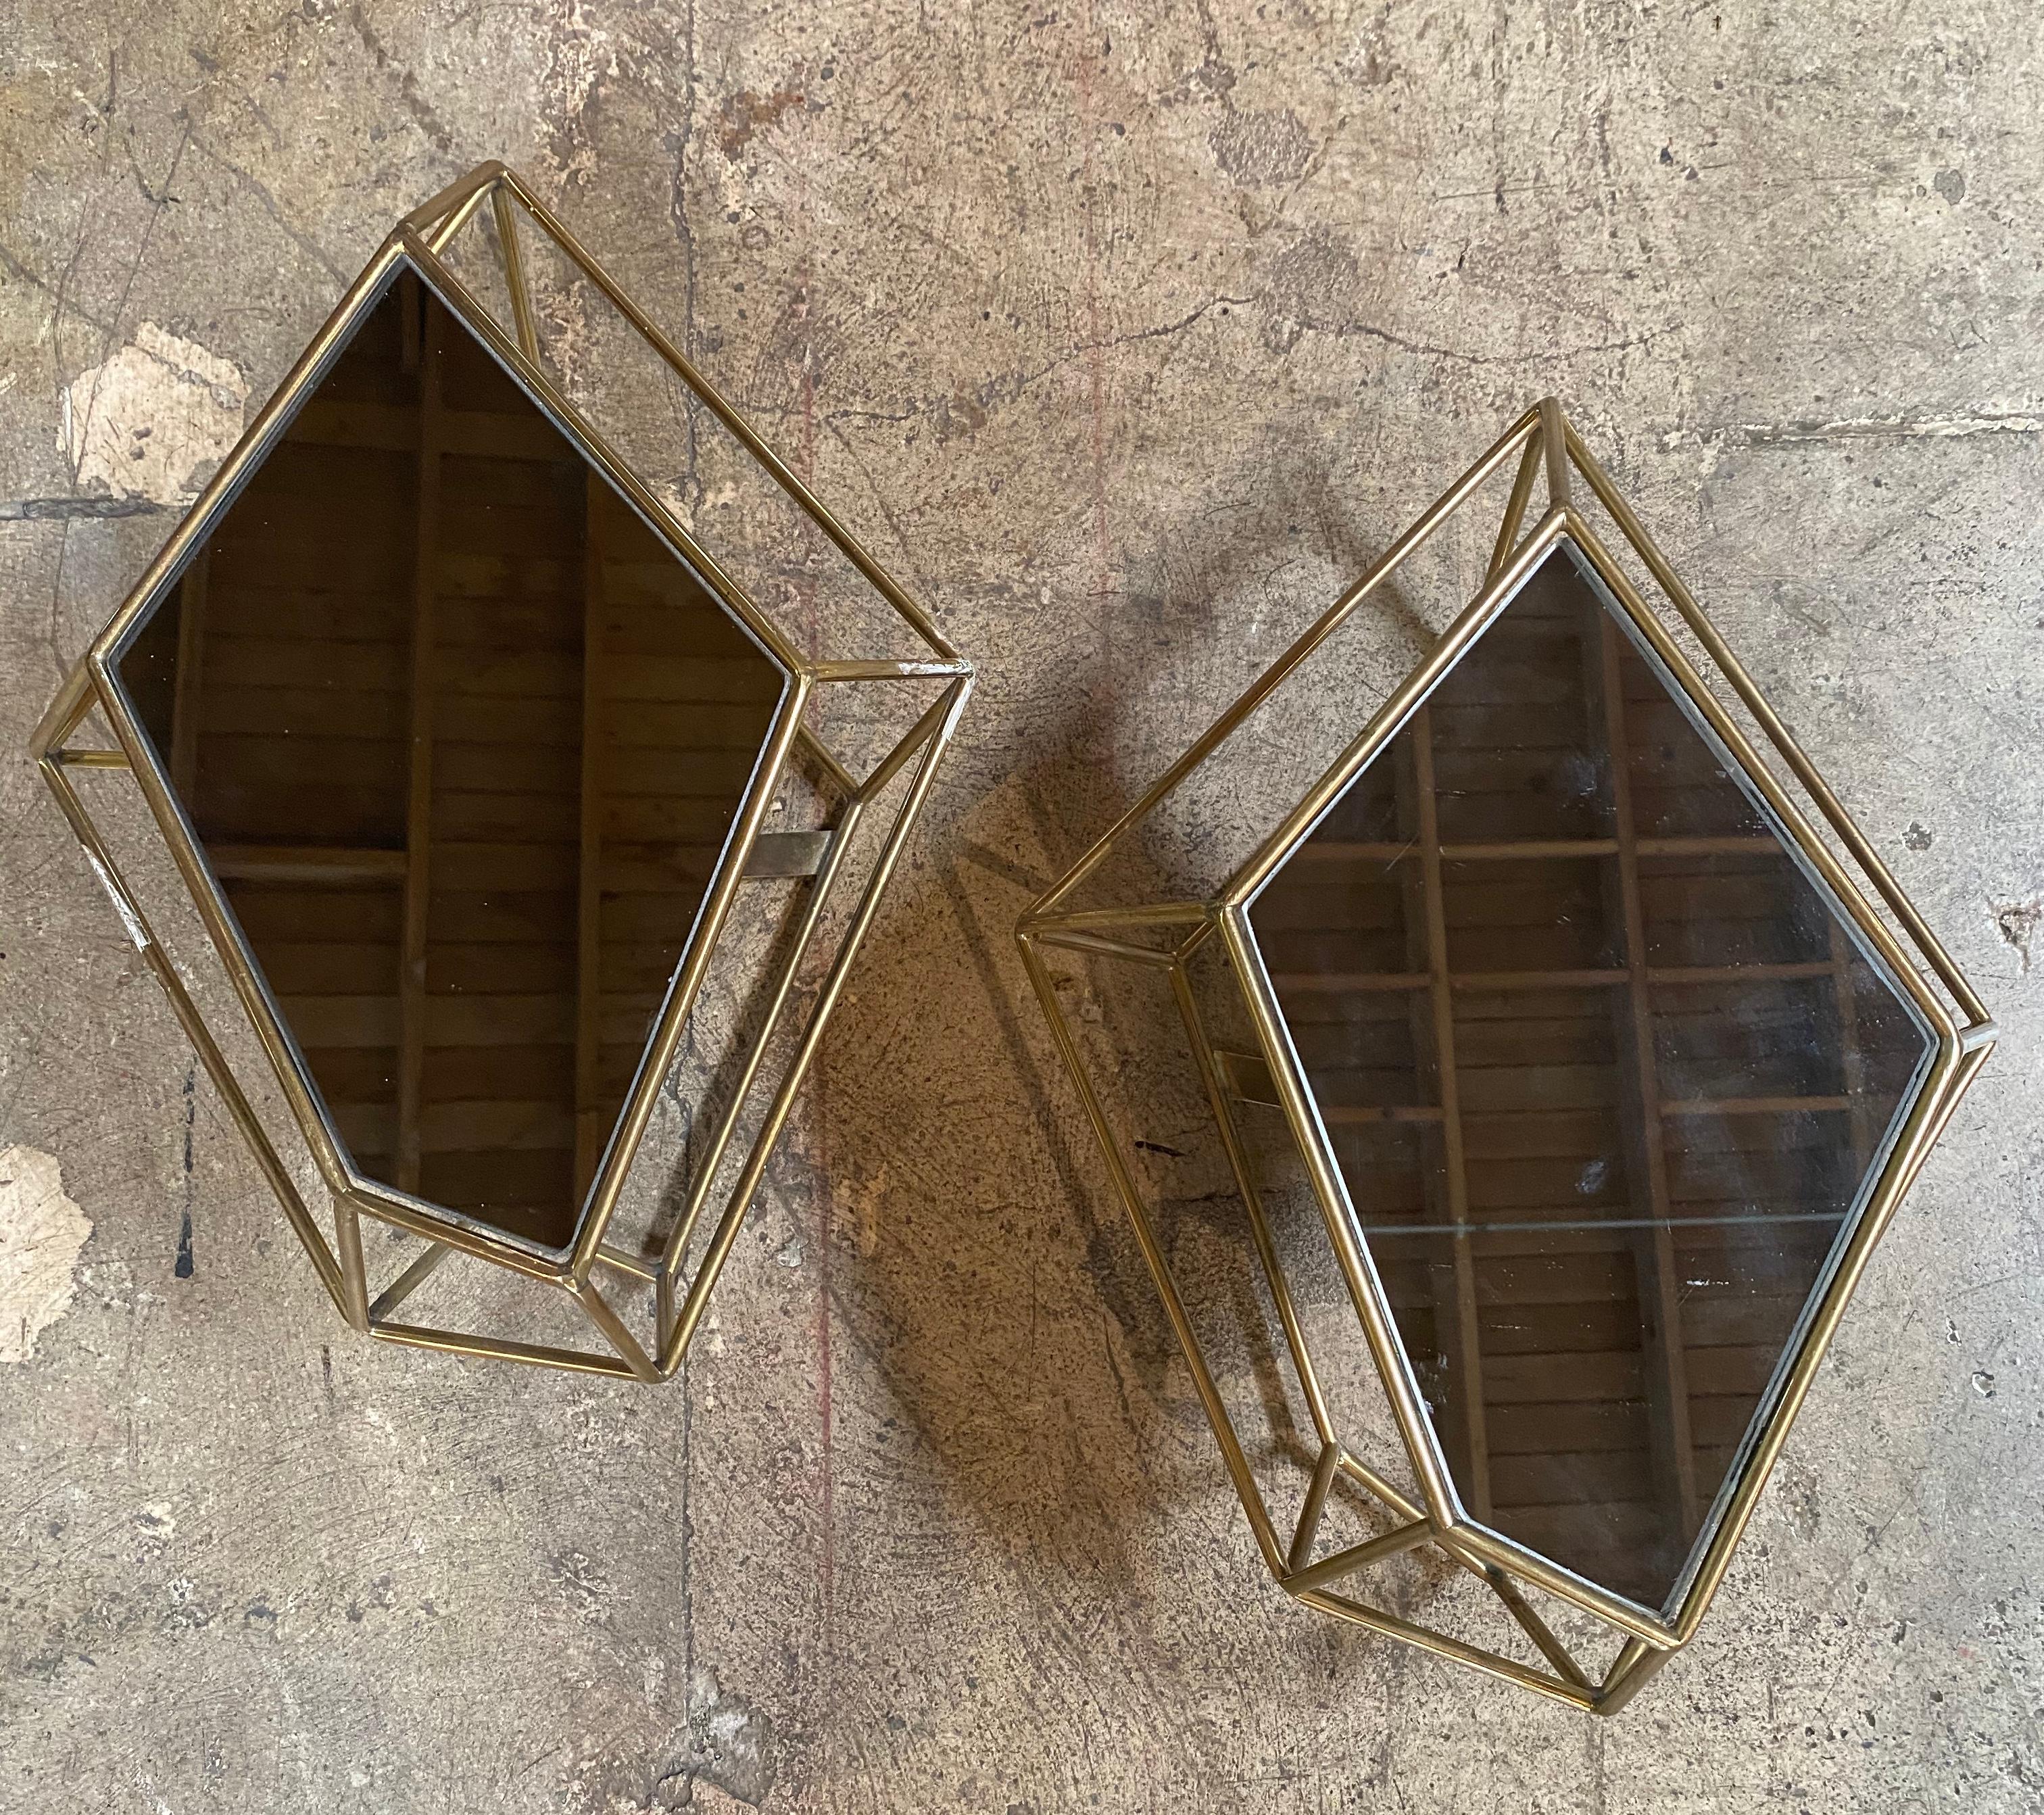 Stunning pair of two sculptural light wall sconces in brass and mirror, Italy, 1970s.
The sconces have an extraordinary sculptural design created with brass and a glass that rests on the upper part of the sconces, an iconic piece that will complete